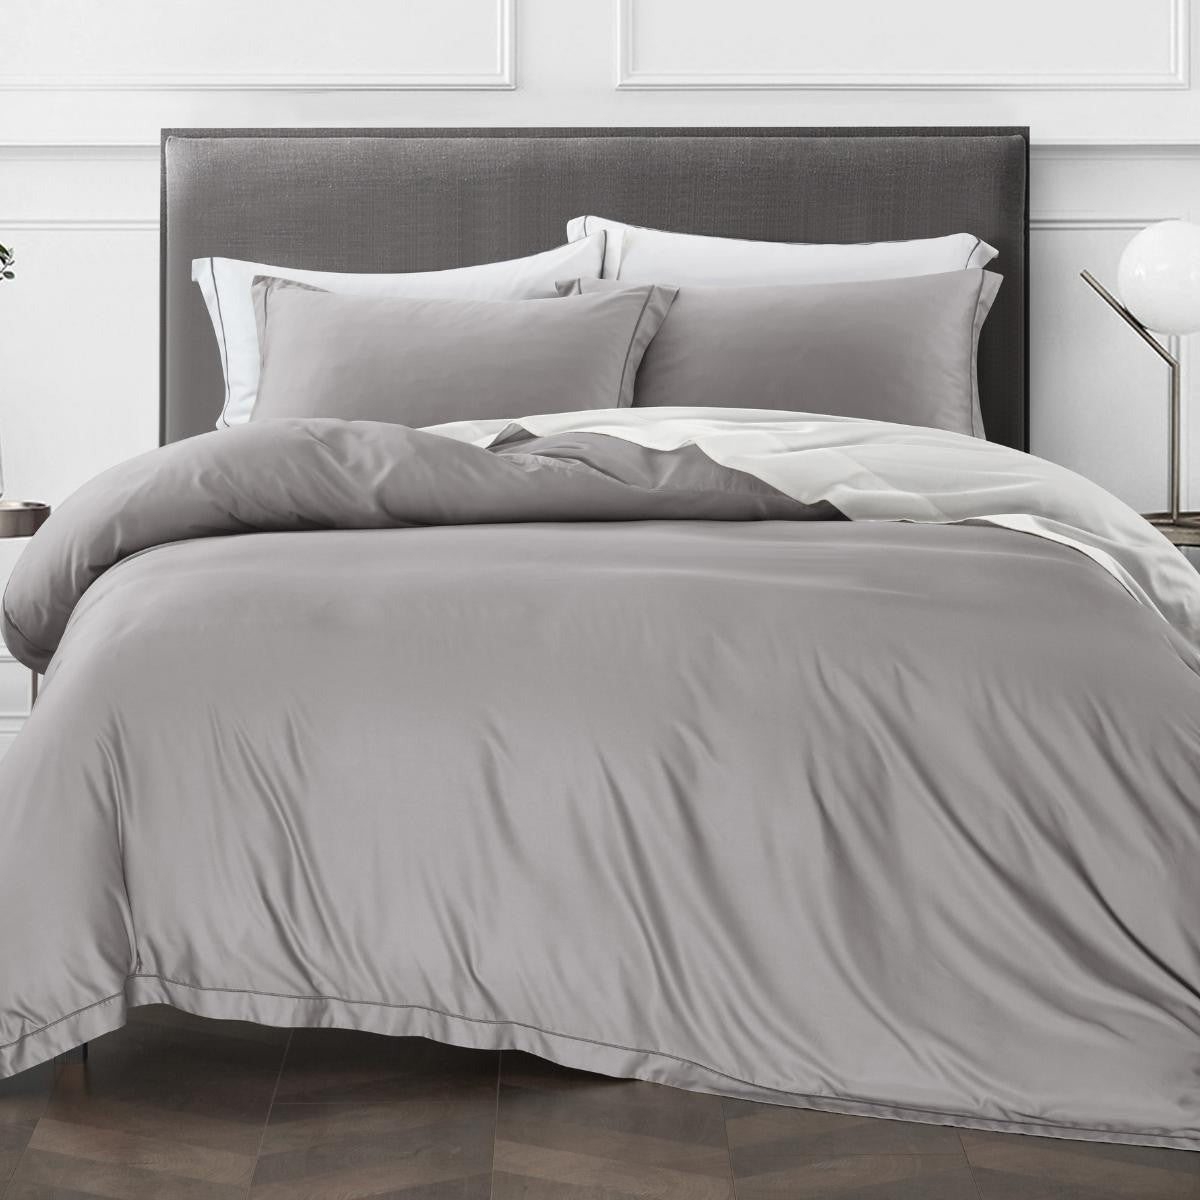 fitted sheet set